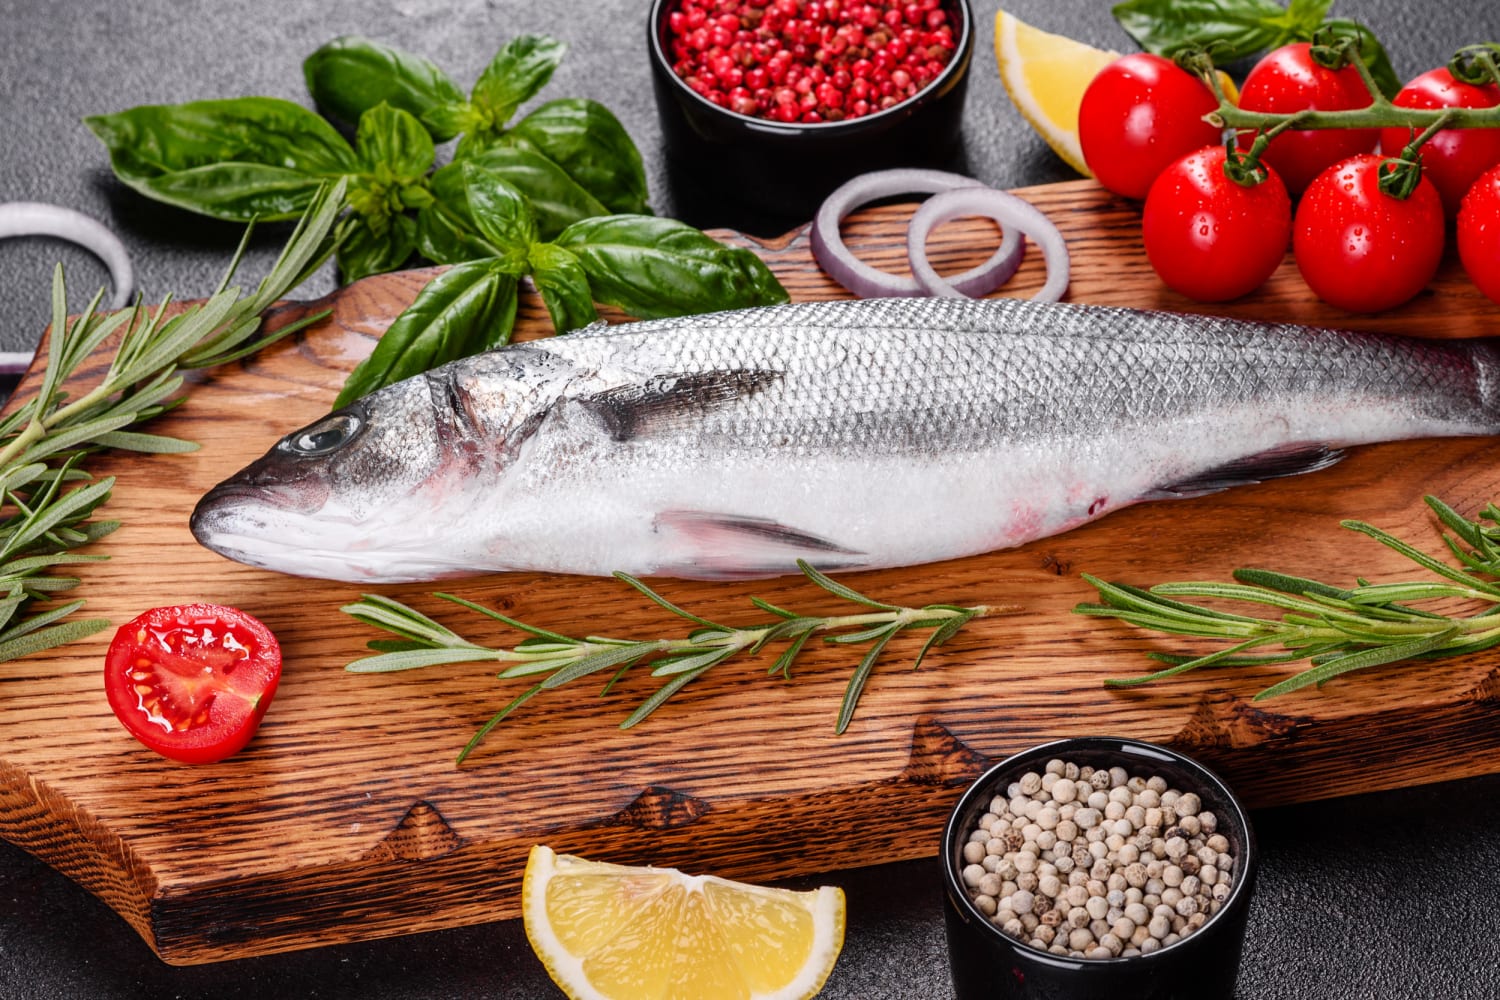 Mediterranean diet may reduce or prevent PTSD symptoms, new research shows